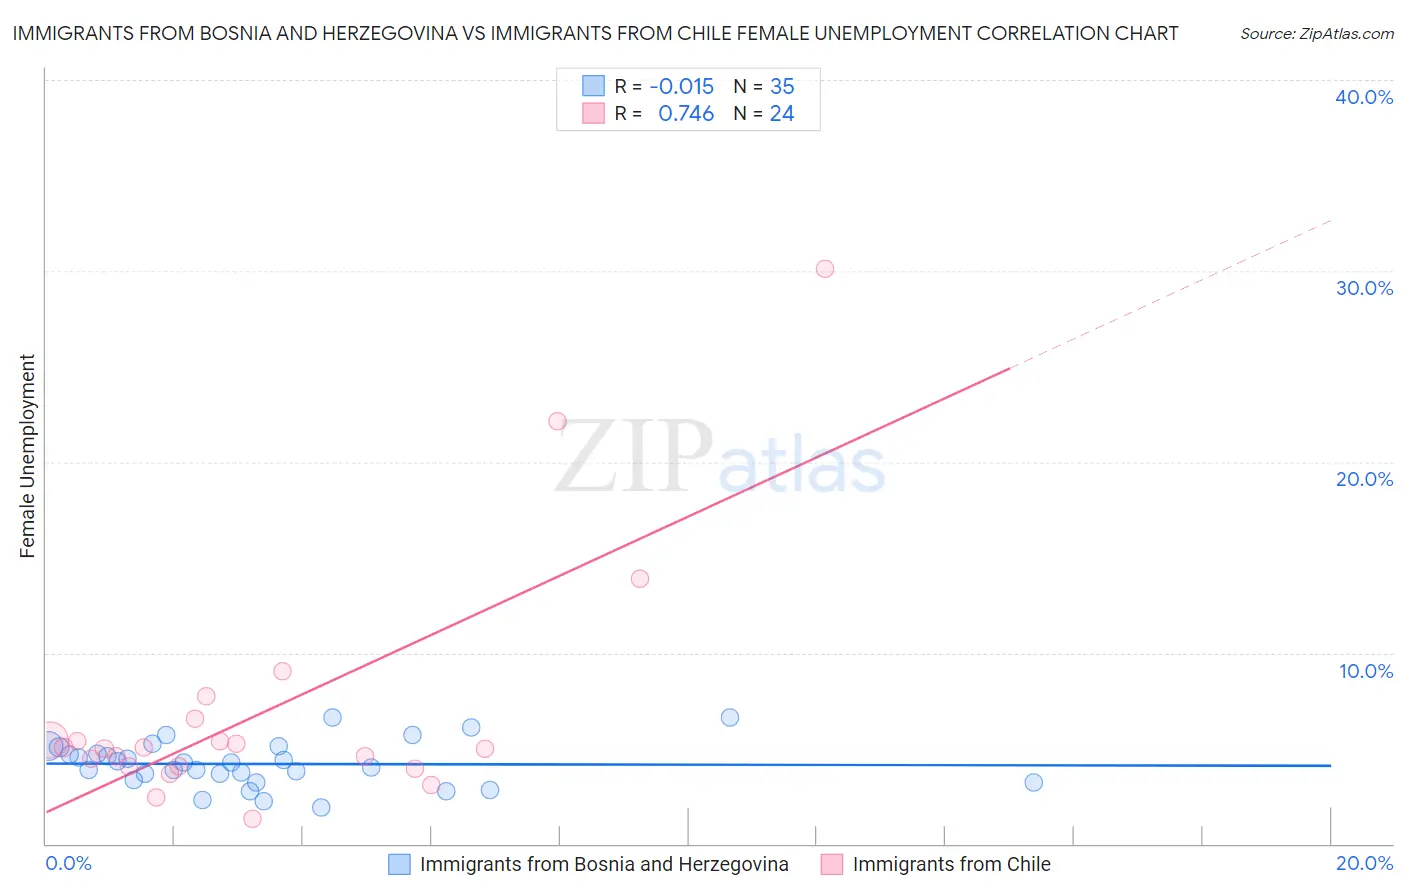 Immigrants from Bosnia and Herzegovina vs Immigrants from Chile Female Unemployment